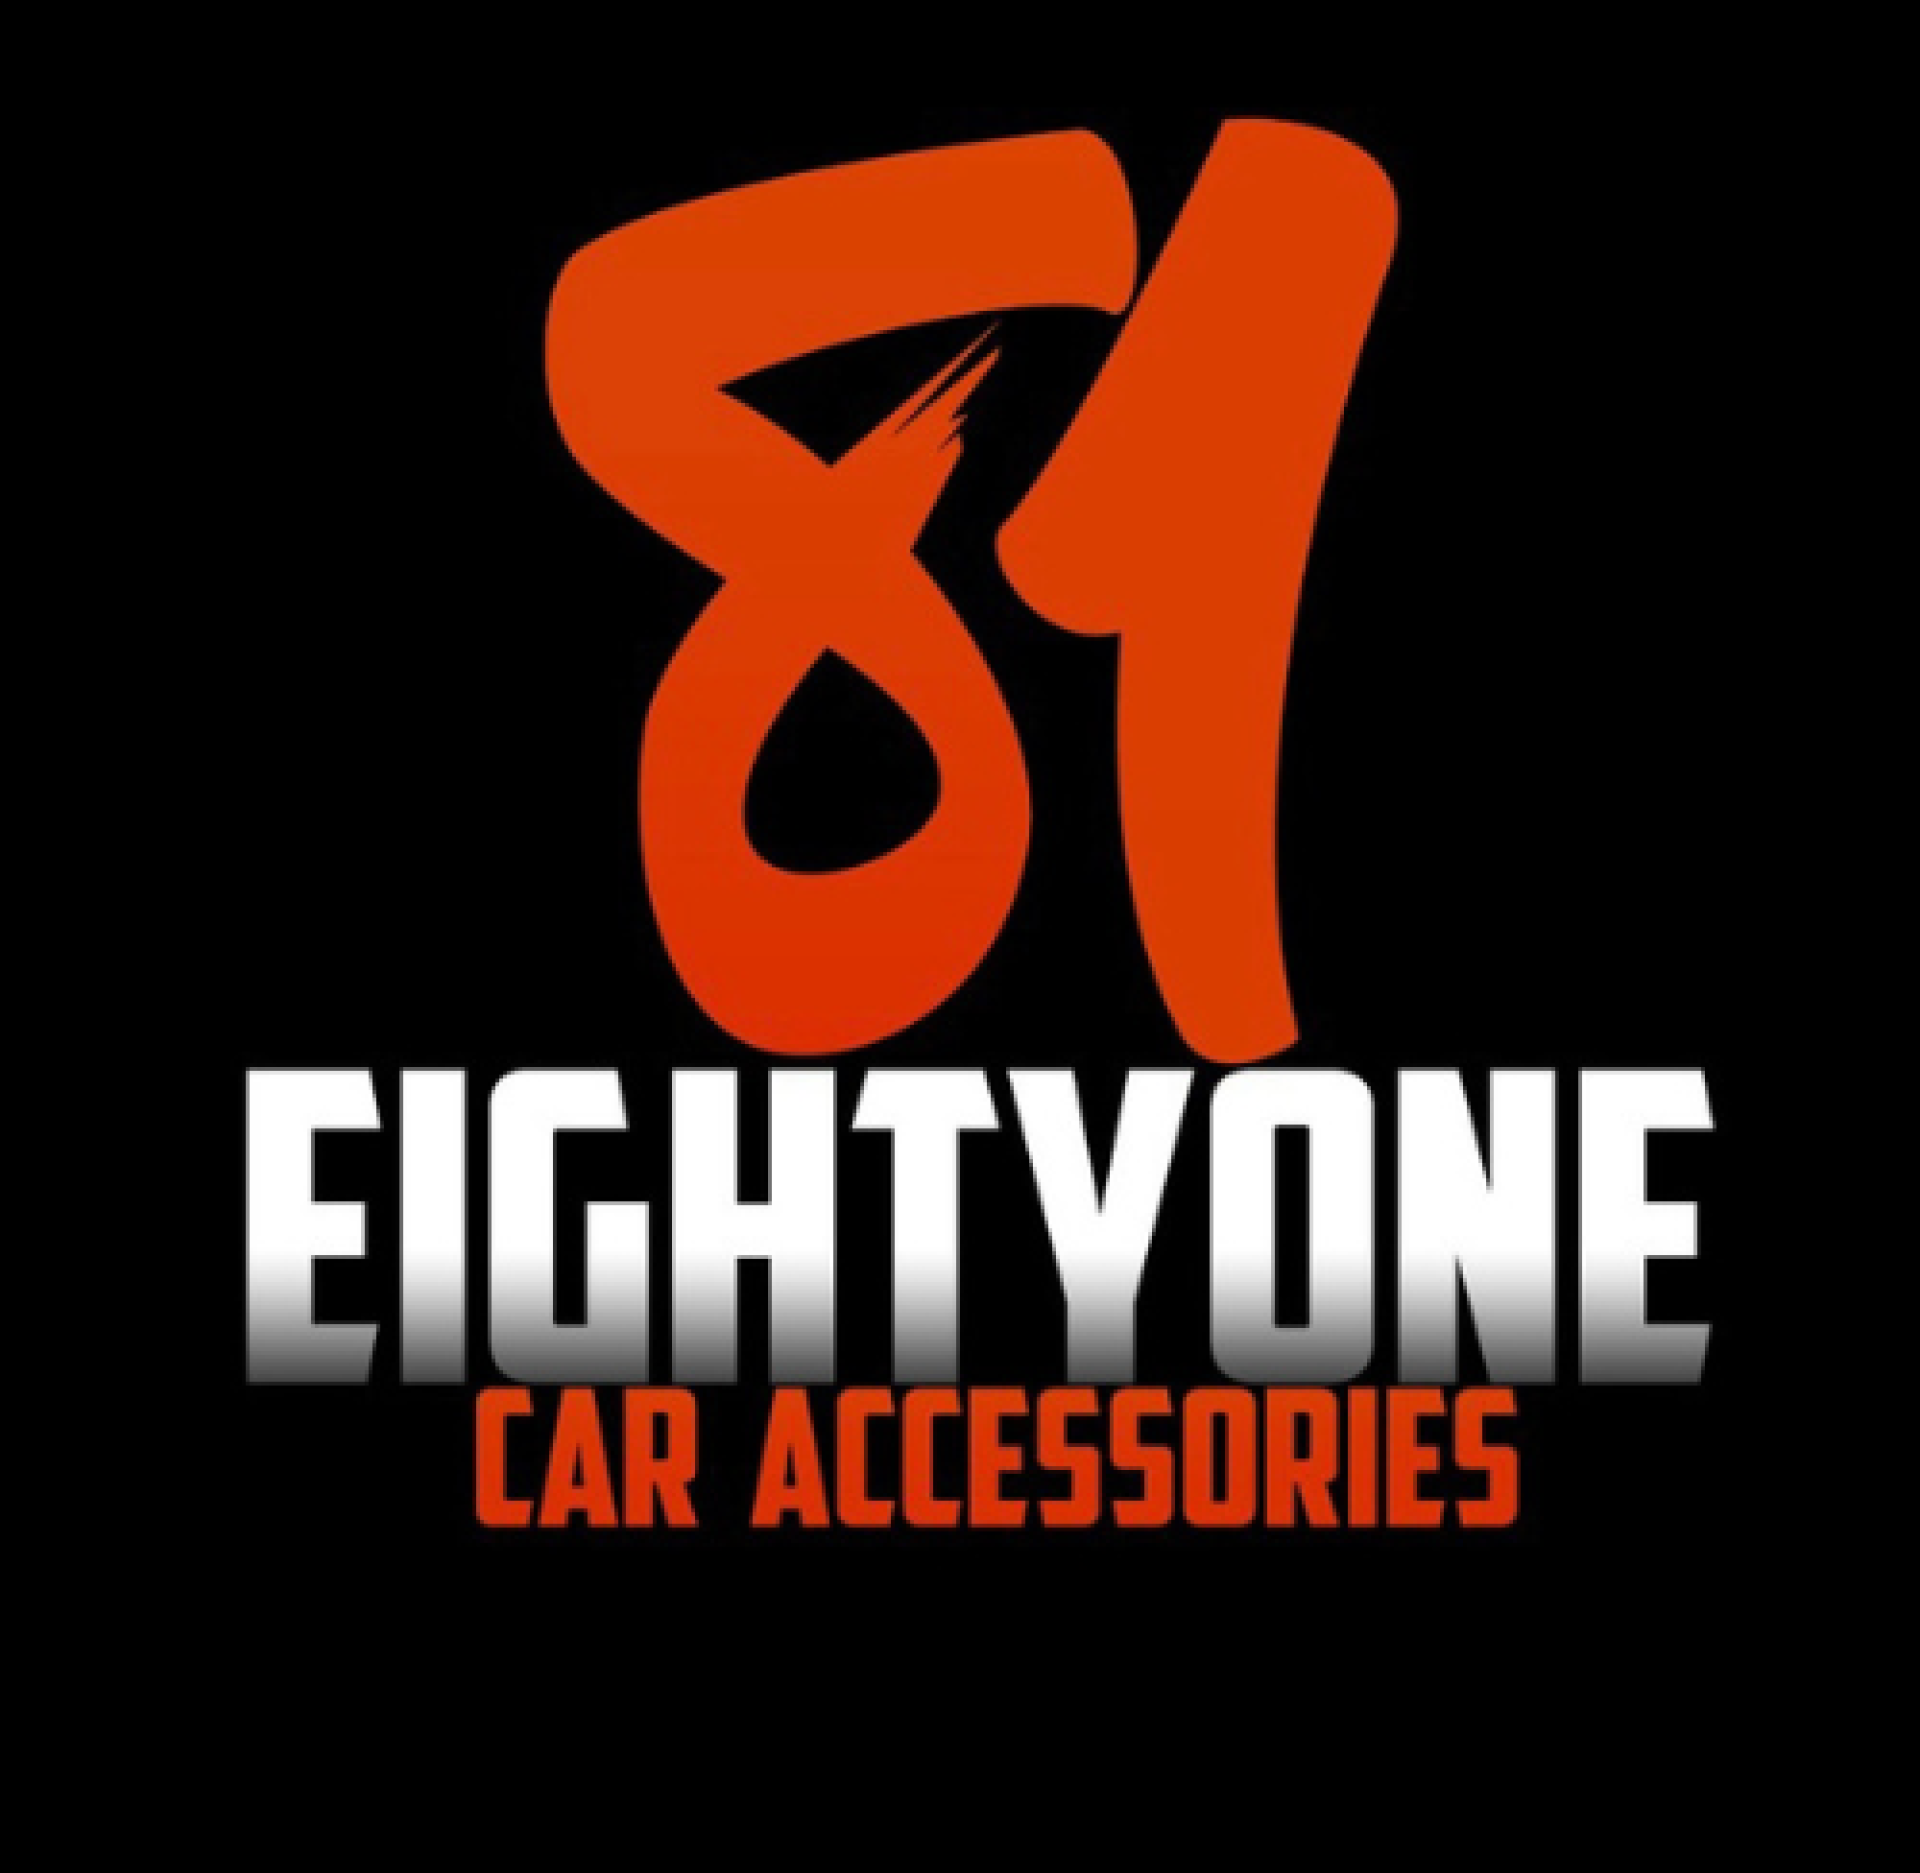 Eighty One Car Accessories